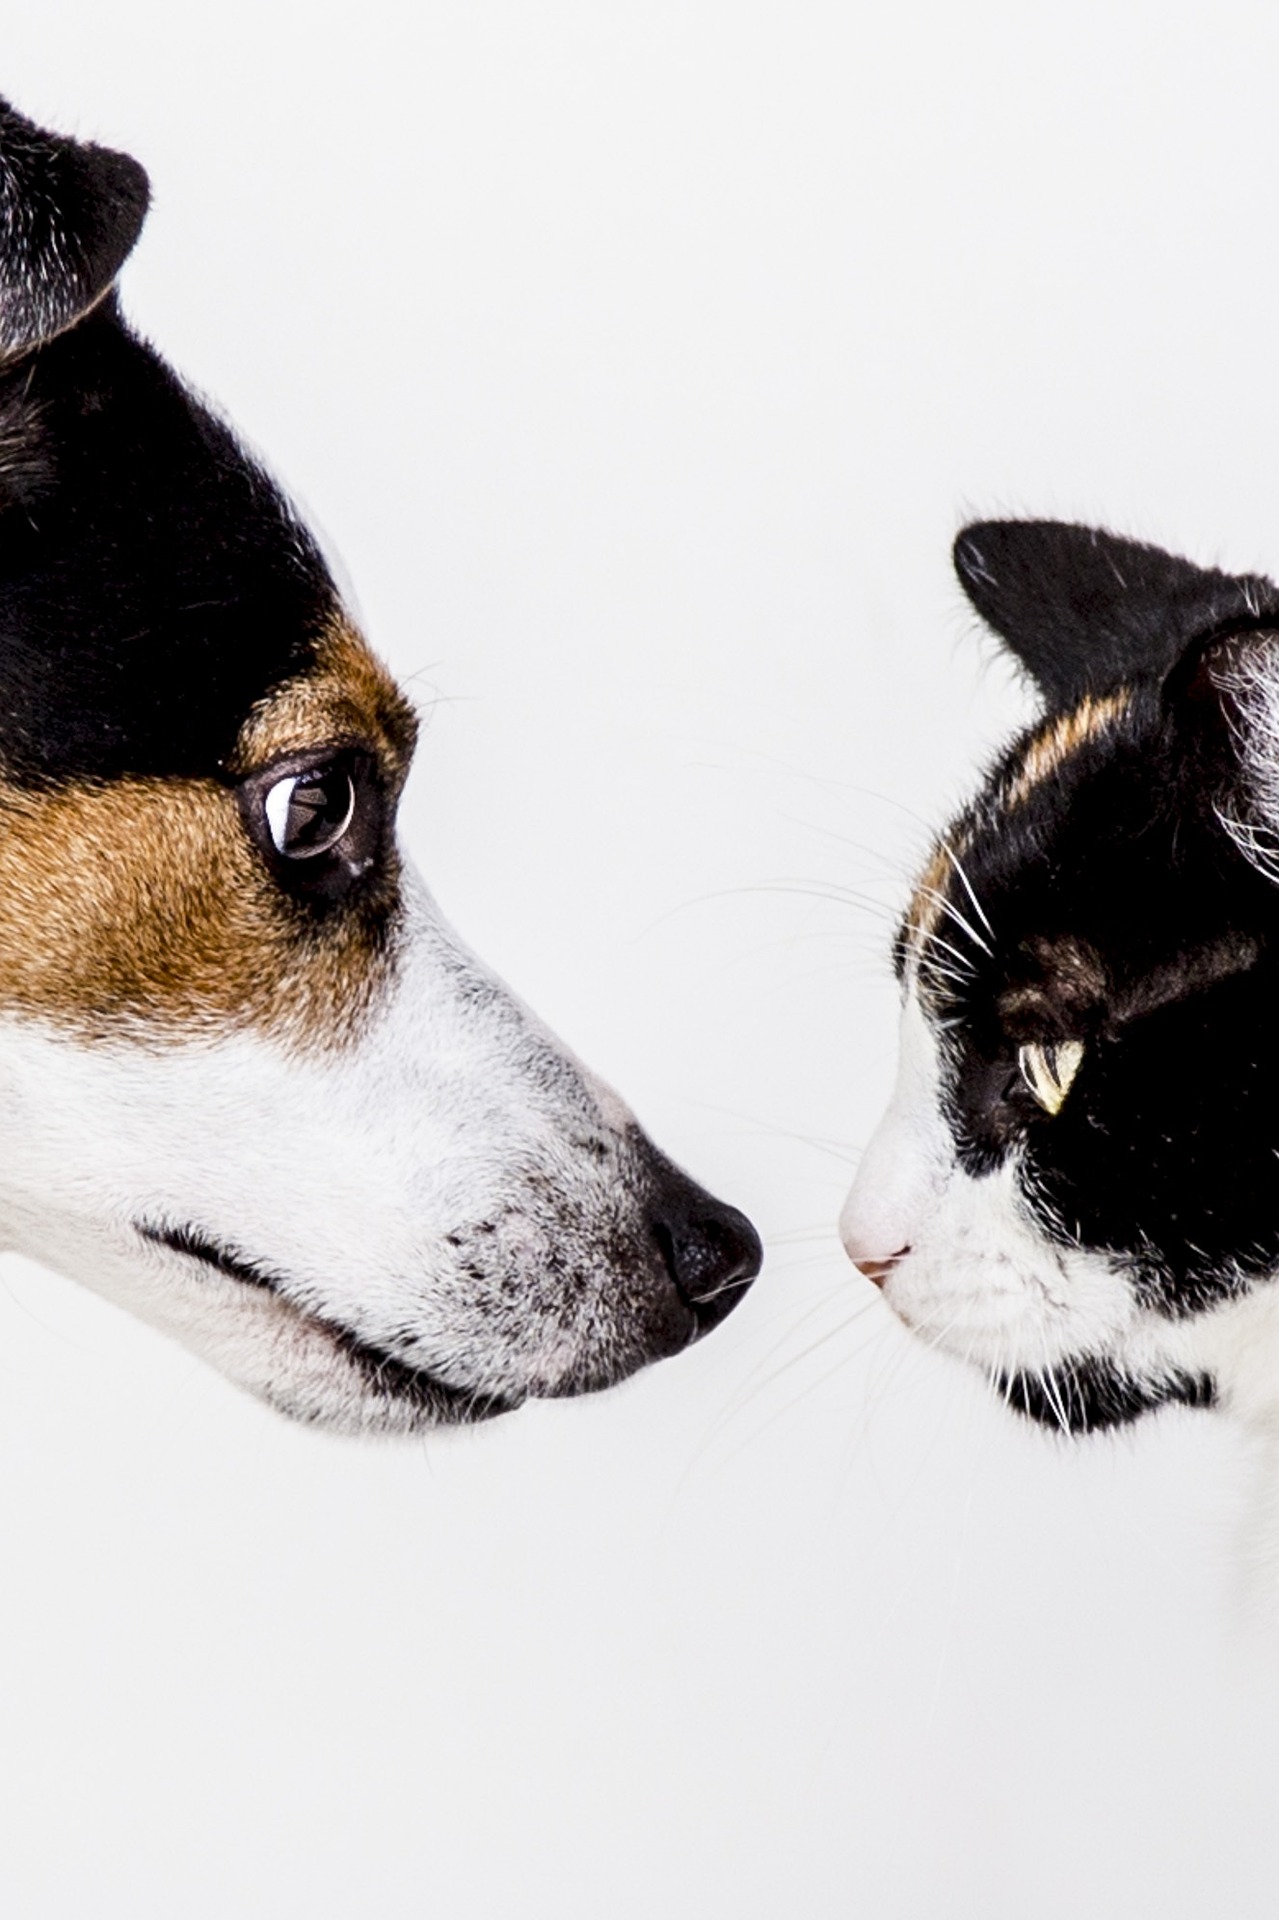 fascinating facts about dogs and cats